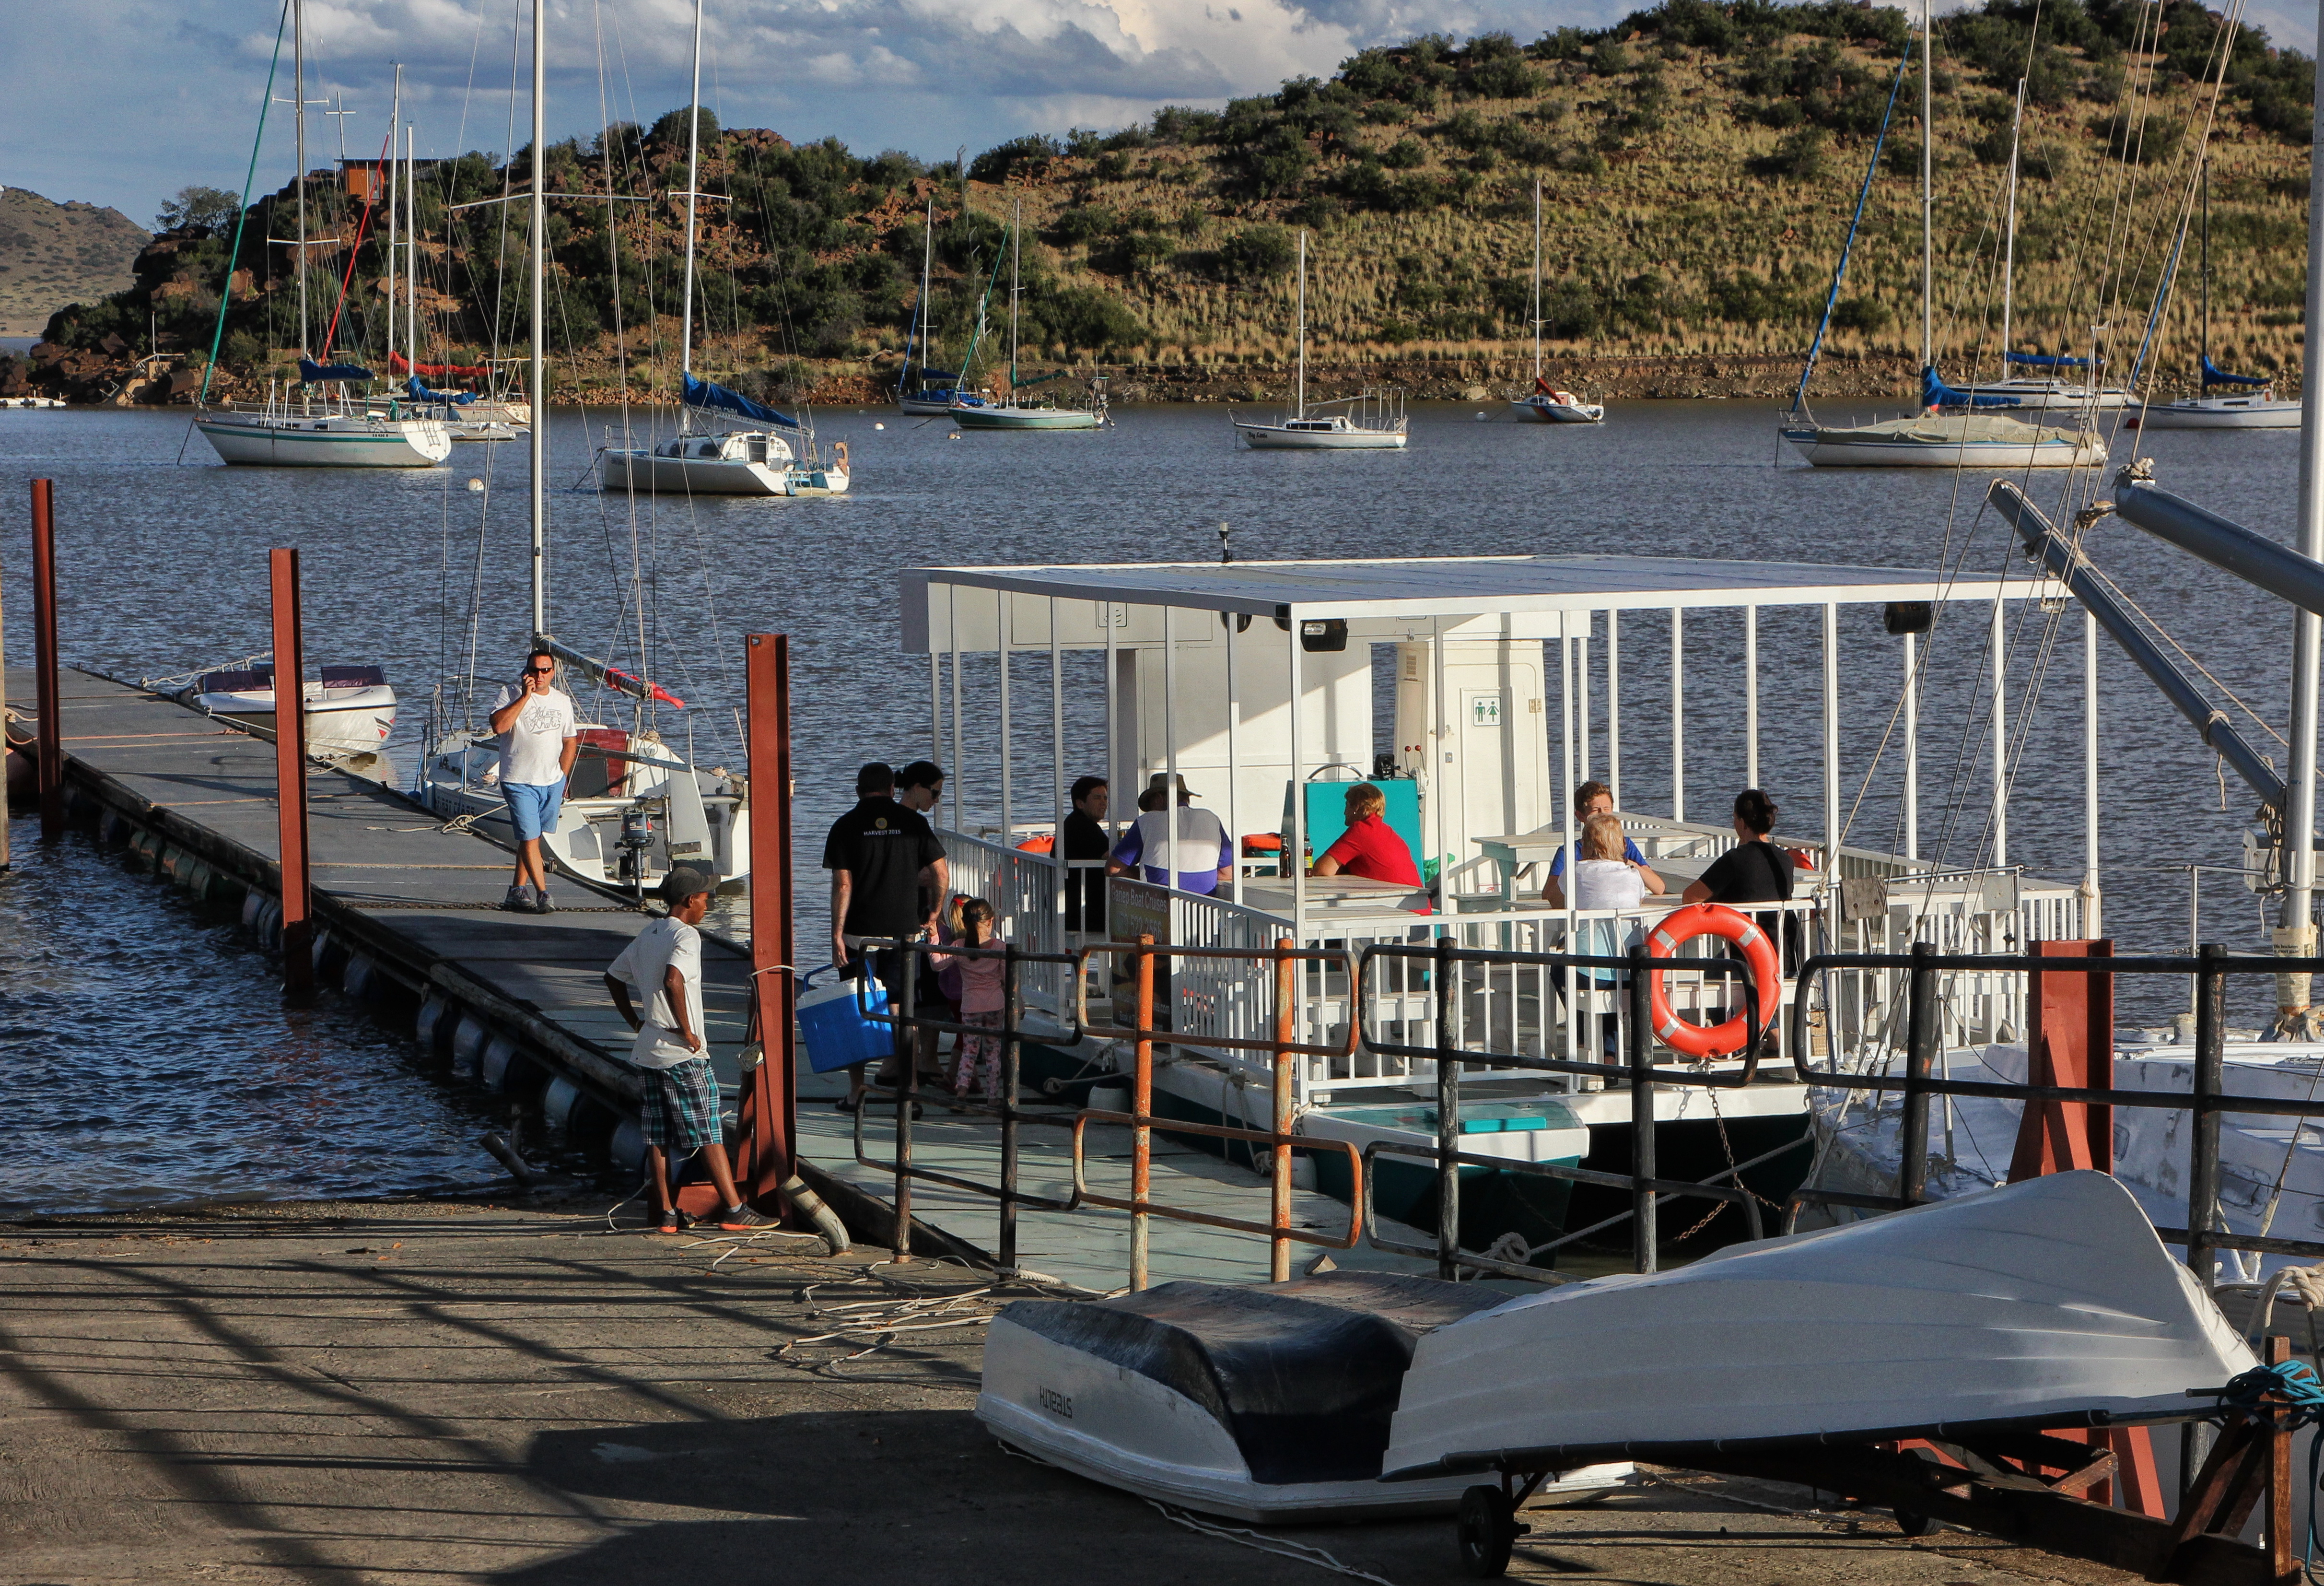 Setting off on an afternoon boat cruise across the dam. Image: Chris Marais